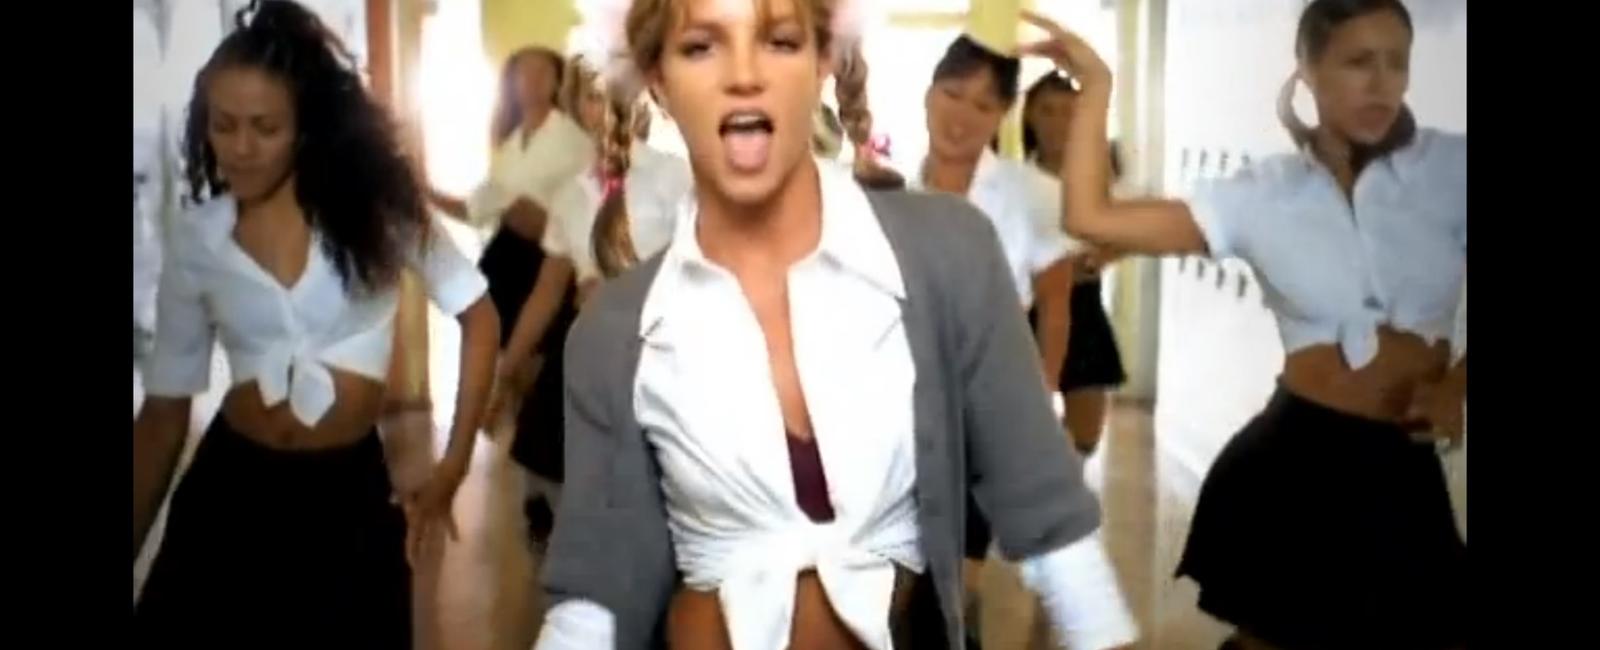 It was britney spears who came up with the idea for the baby one more time music video including the iconic and at the time controversial tied up shirt and school uniforms